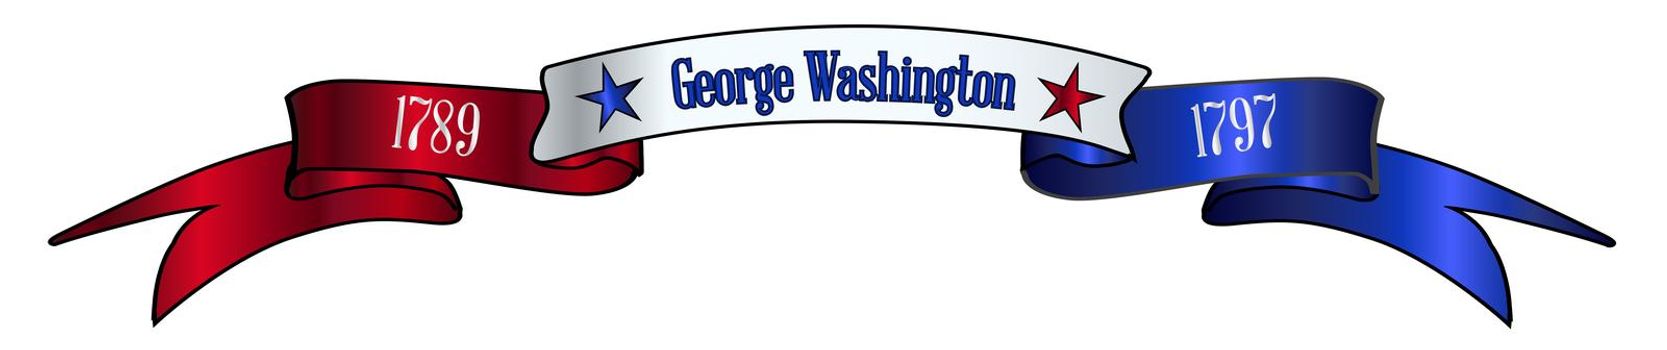 A red white and blue satin or silk ribbon banner with the text George Washington and stars